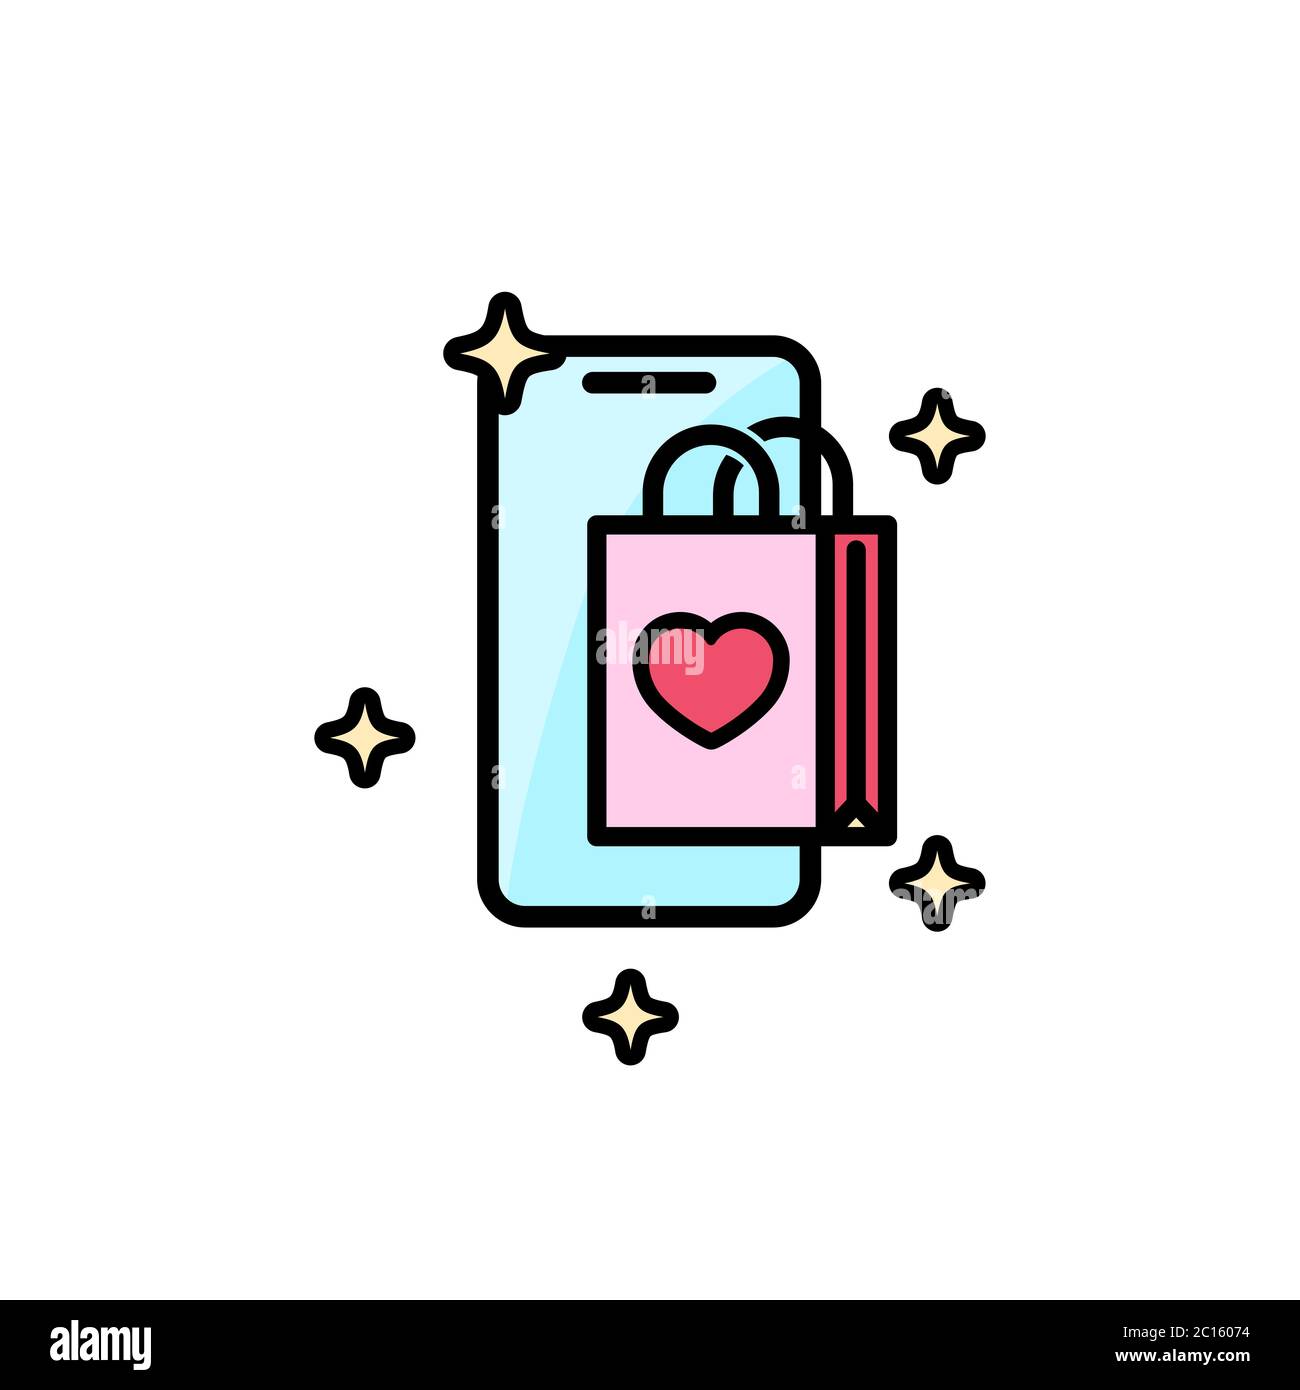 https://c8.alamy.com/comp/2C16074/shopping-online-ecommerce-with-bags-in-smartphone-with-heart-icon-flat-love-stories-symbol-valentines-day-concept-vector-on-isolated-white-2C16074.jpg